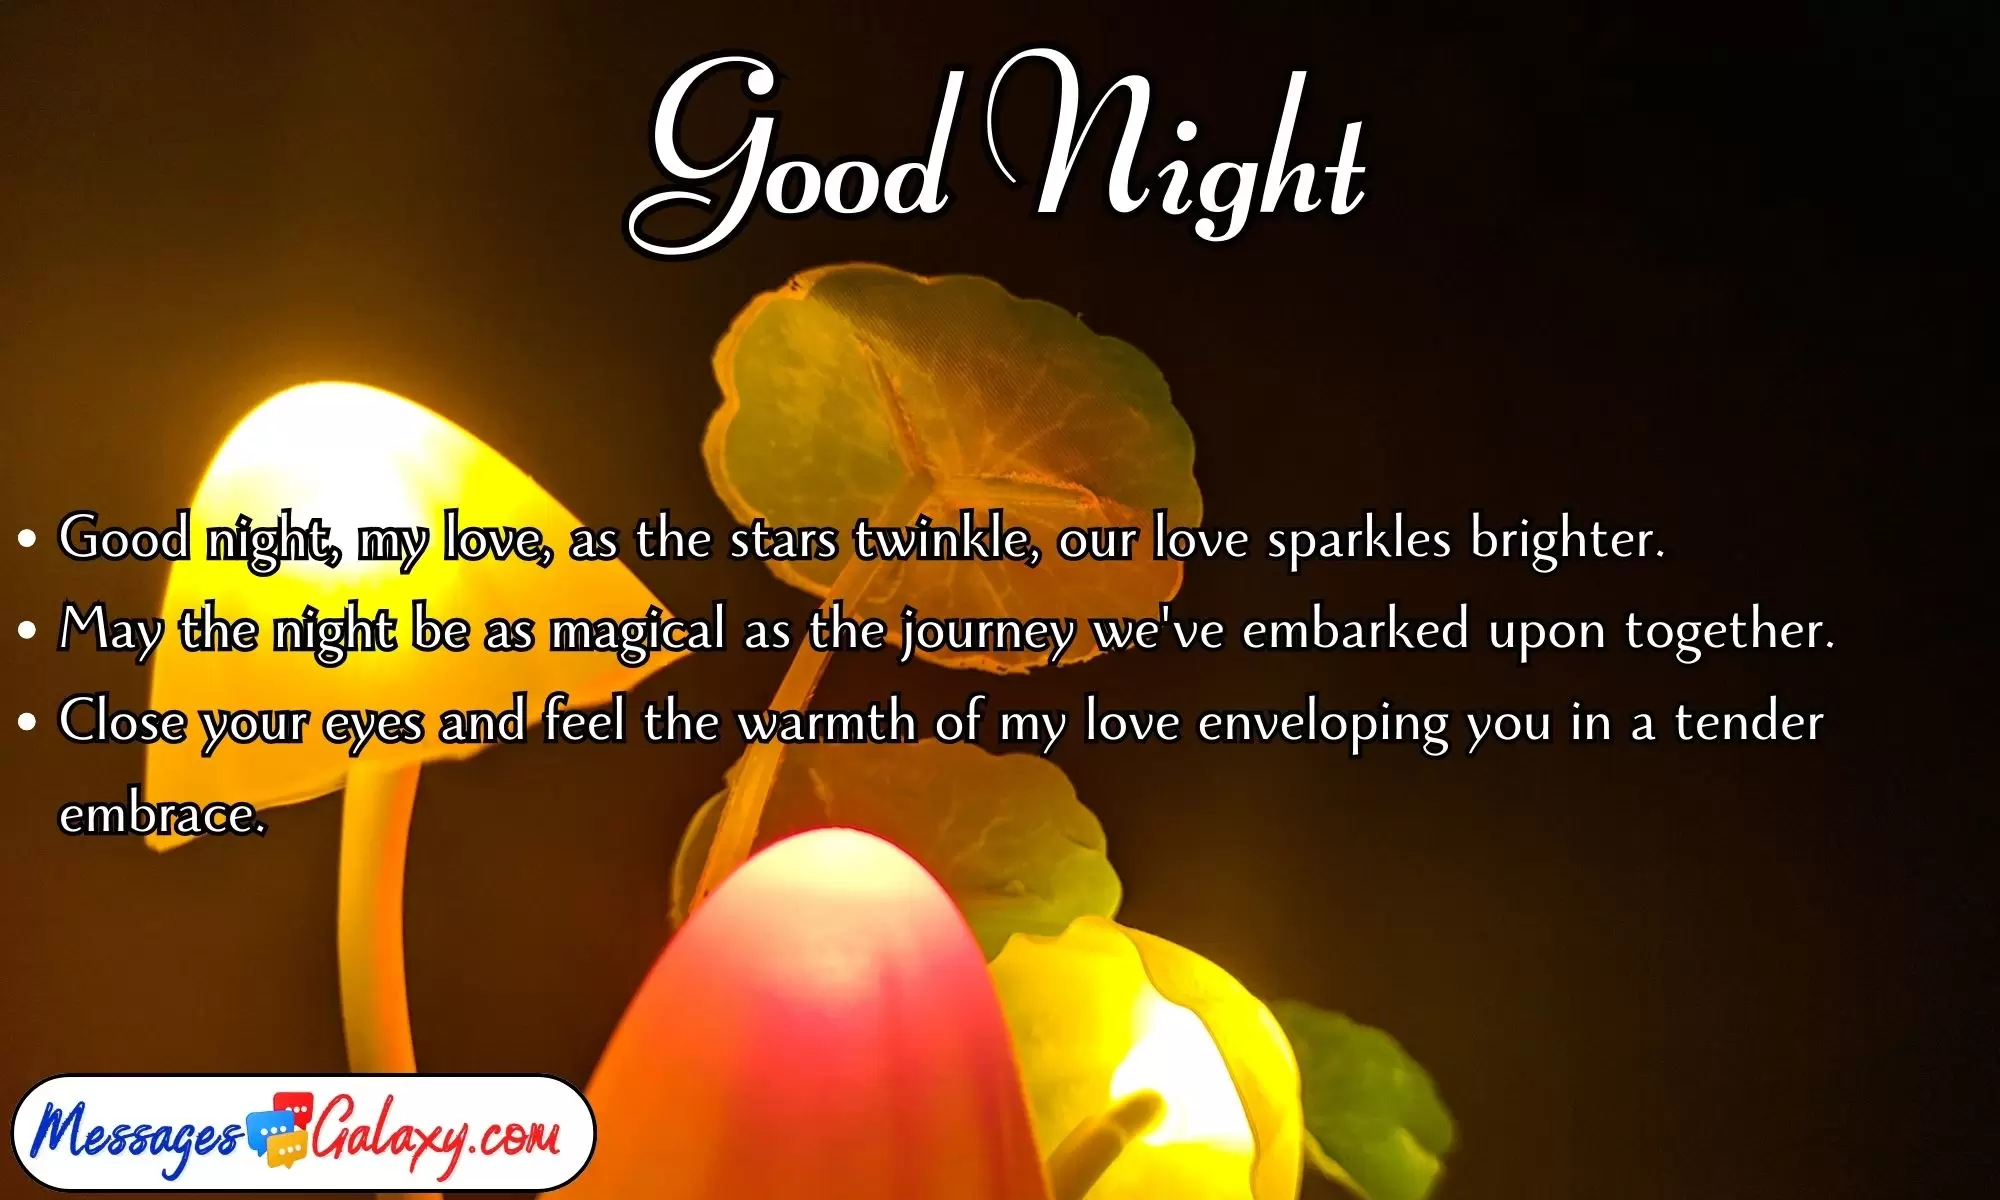 Good Night Quotes for Fiance to Strengthen Your Bond